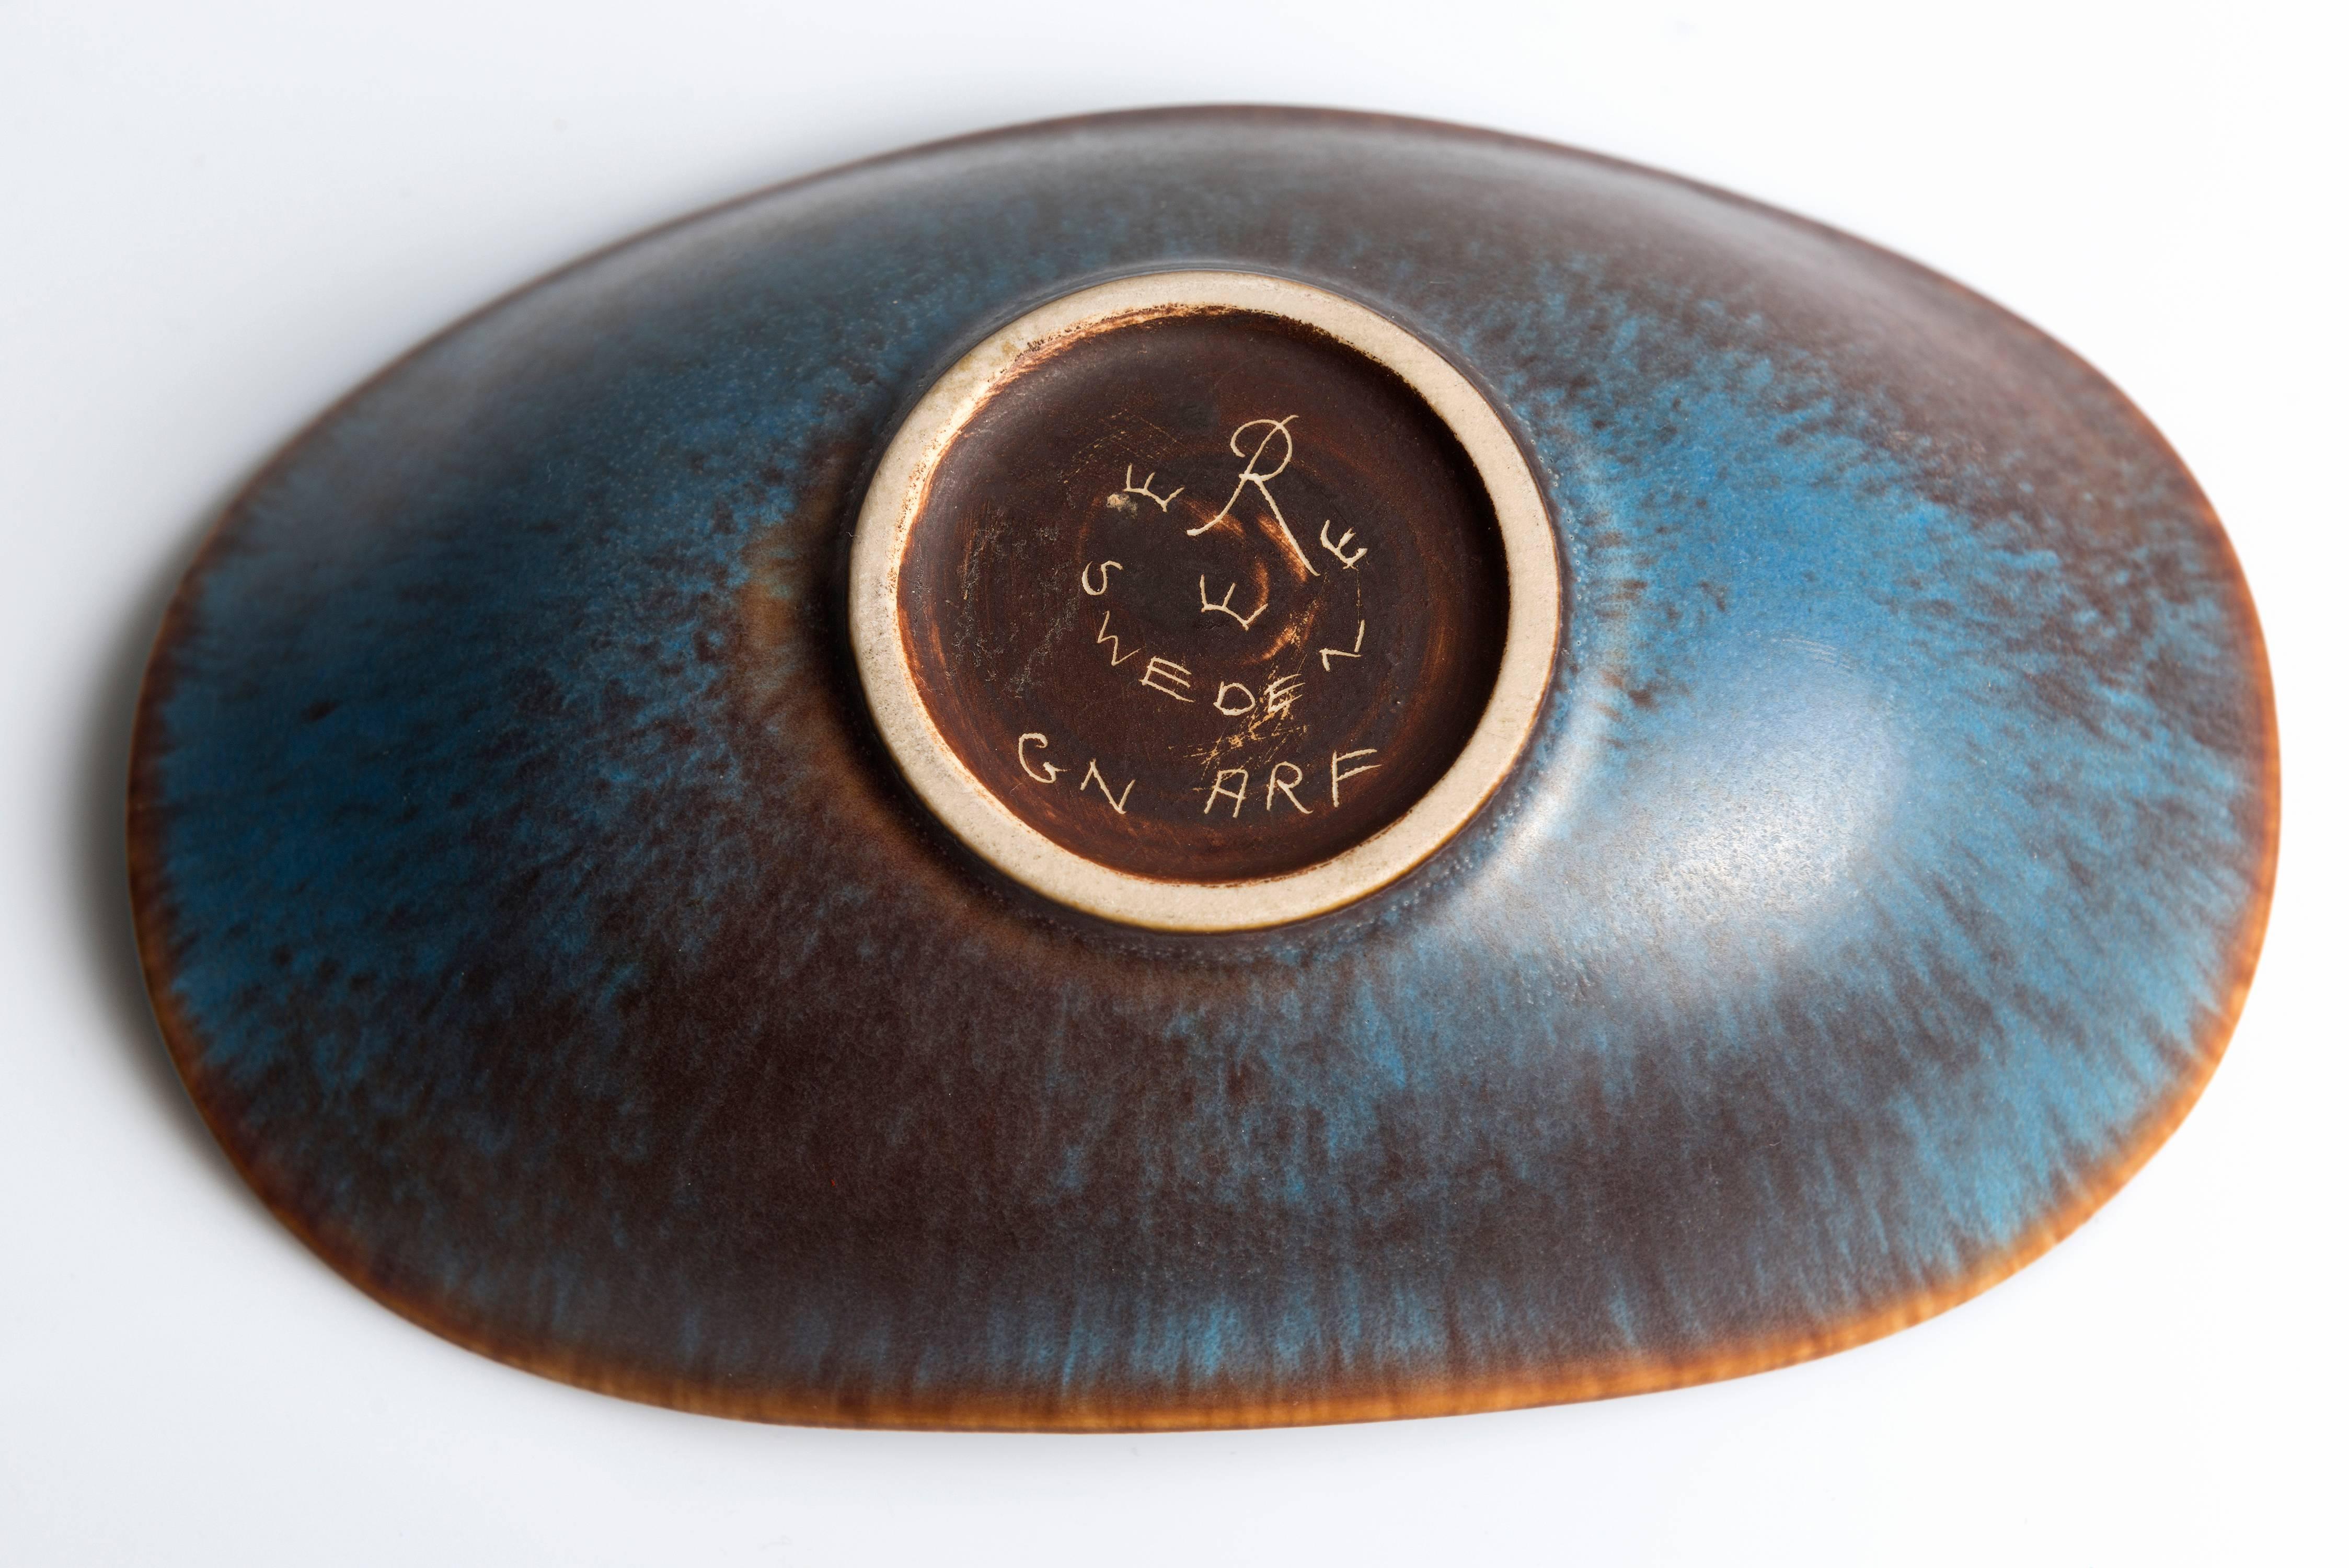 A beautiful biomorphic bowl with semi-matte mottled glaze.
Marked to the base with 'R', Three Crowns, Sweden, the model number and the designer's monogram. In fine vintage condition.